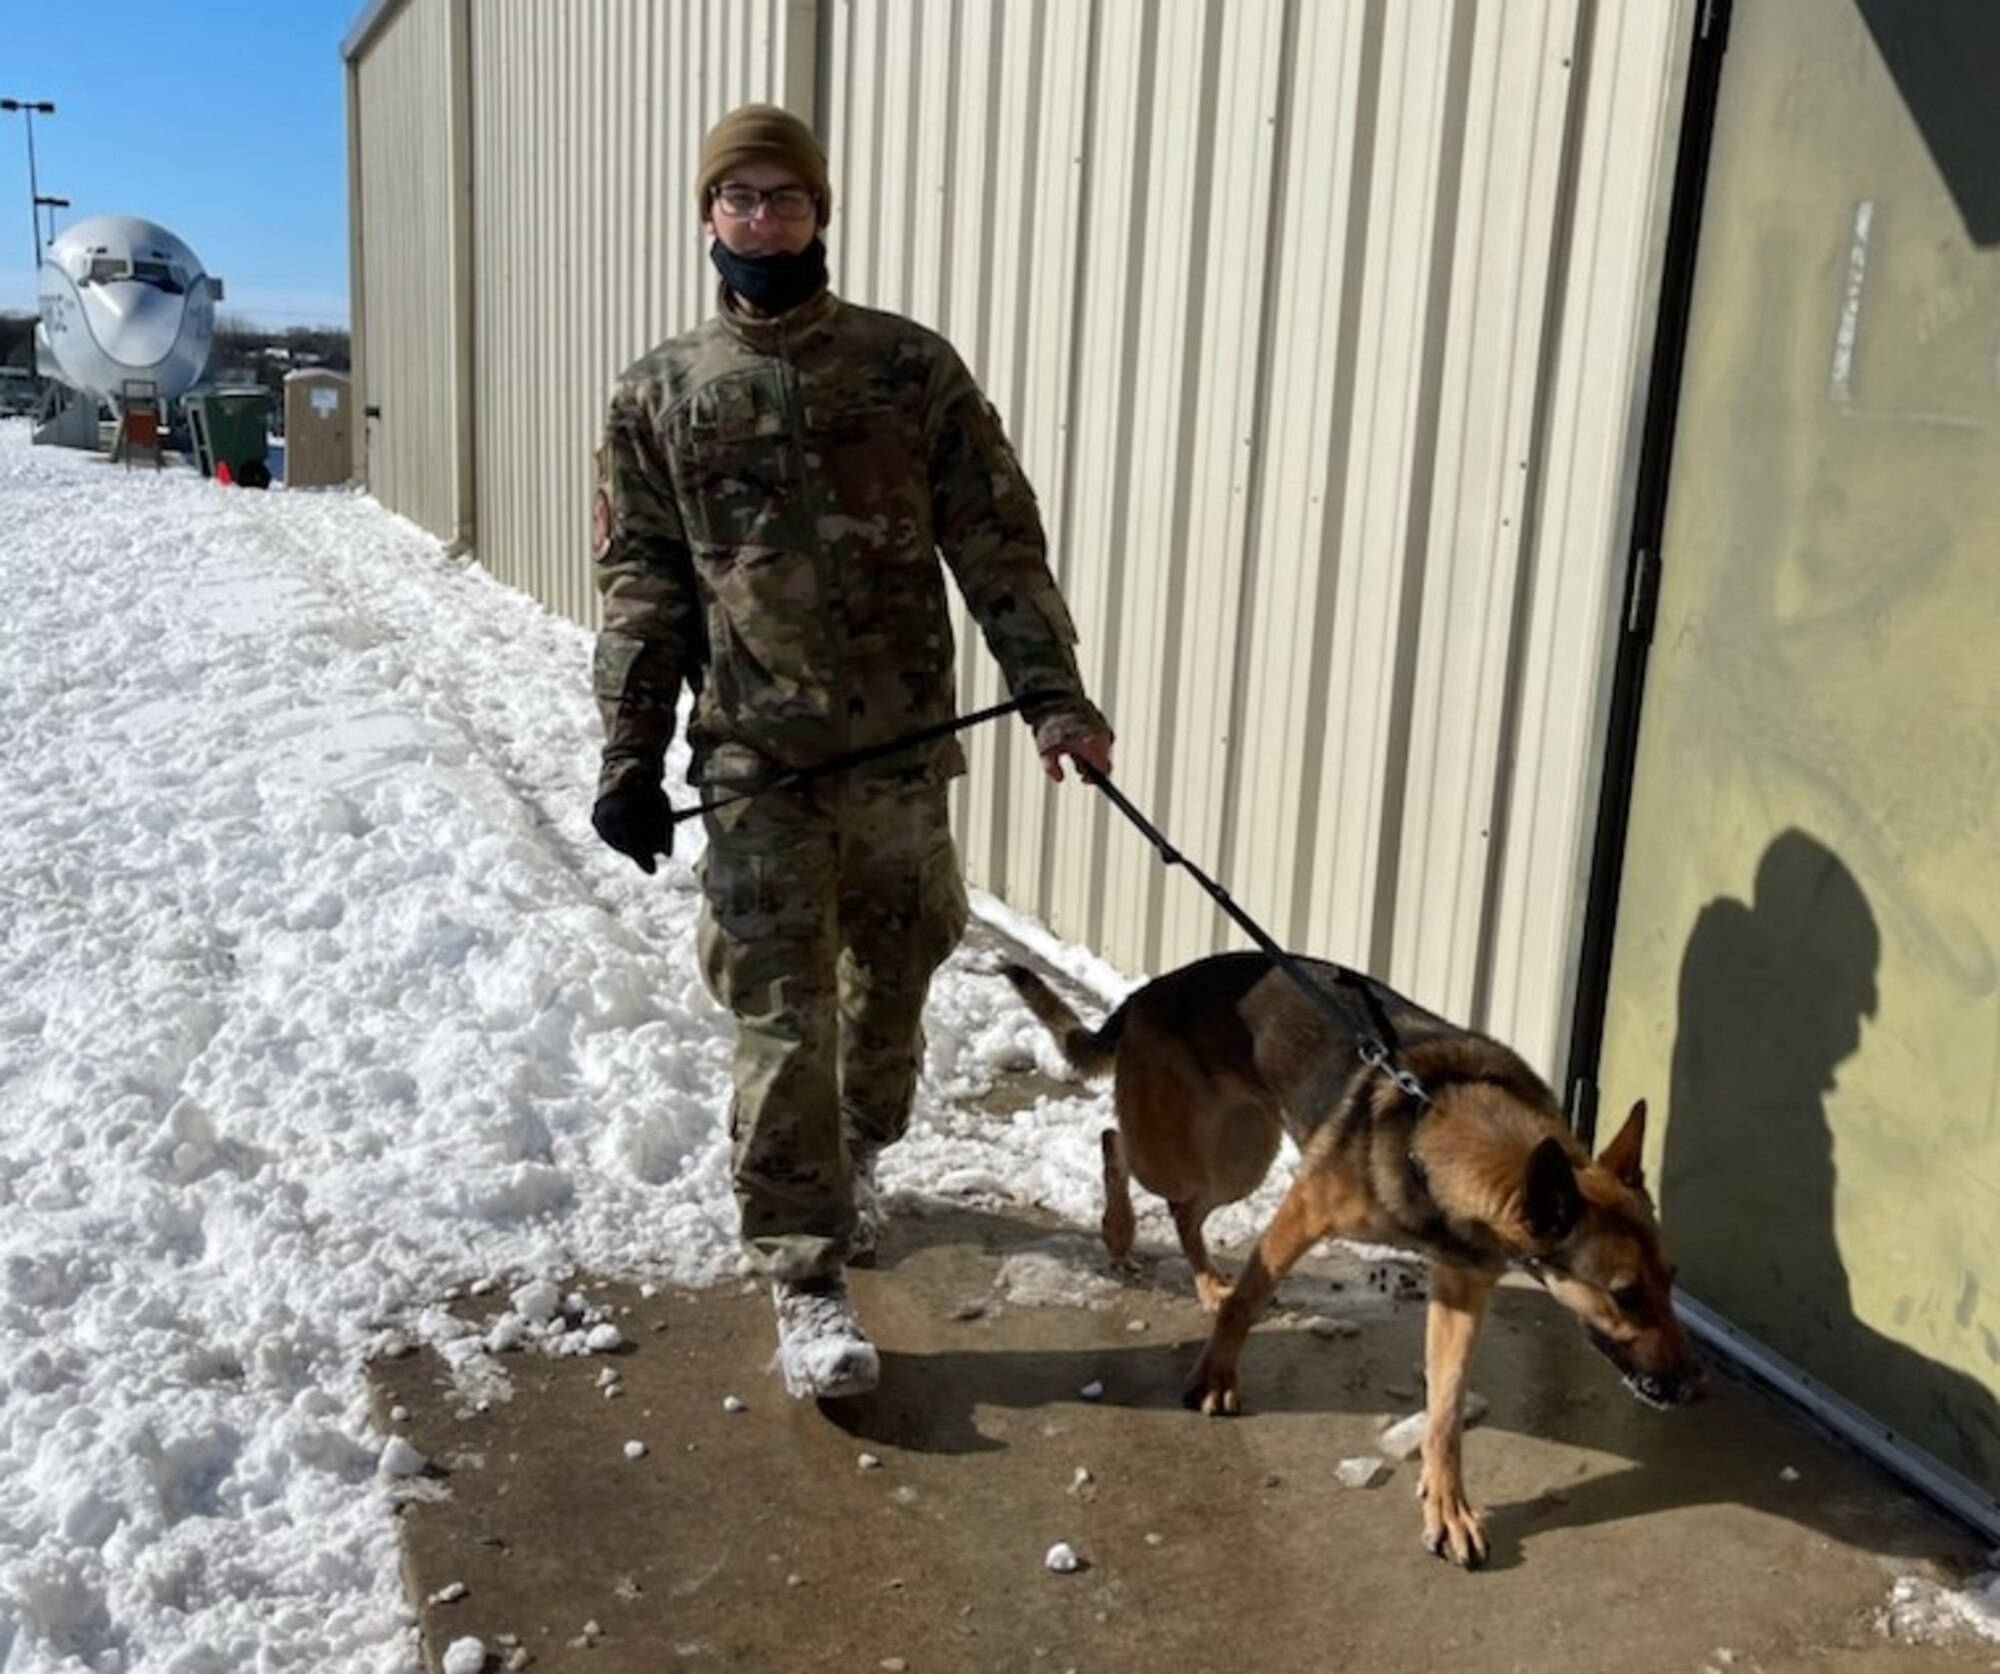 Airman 1st Class Dominic A. Fallon, a student in the Military Working Dog Handlers course, walks one of the dogs being kept warm inside at Joint Base San Antonio-Chapman Training Annex Feb. 15, 2021.